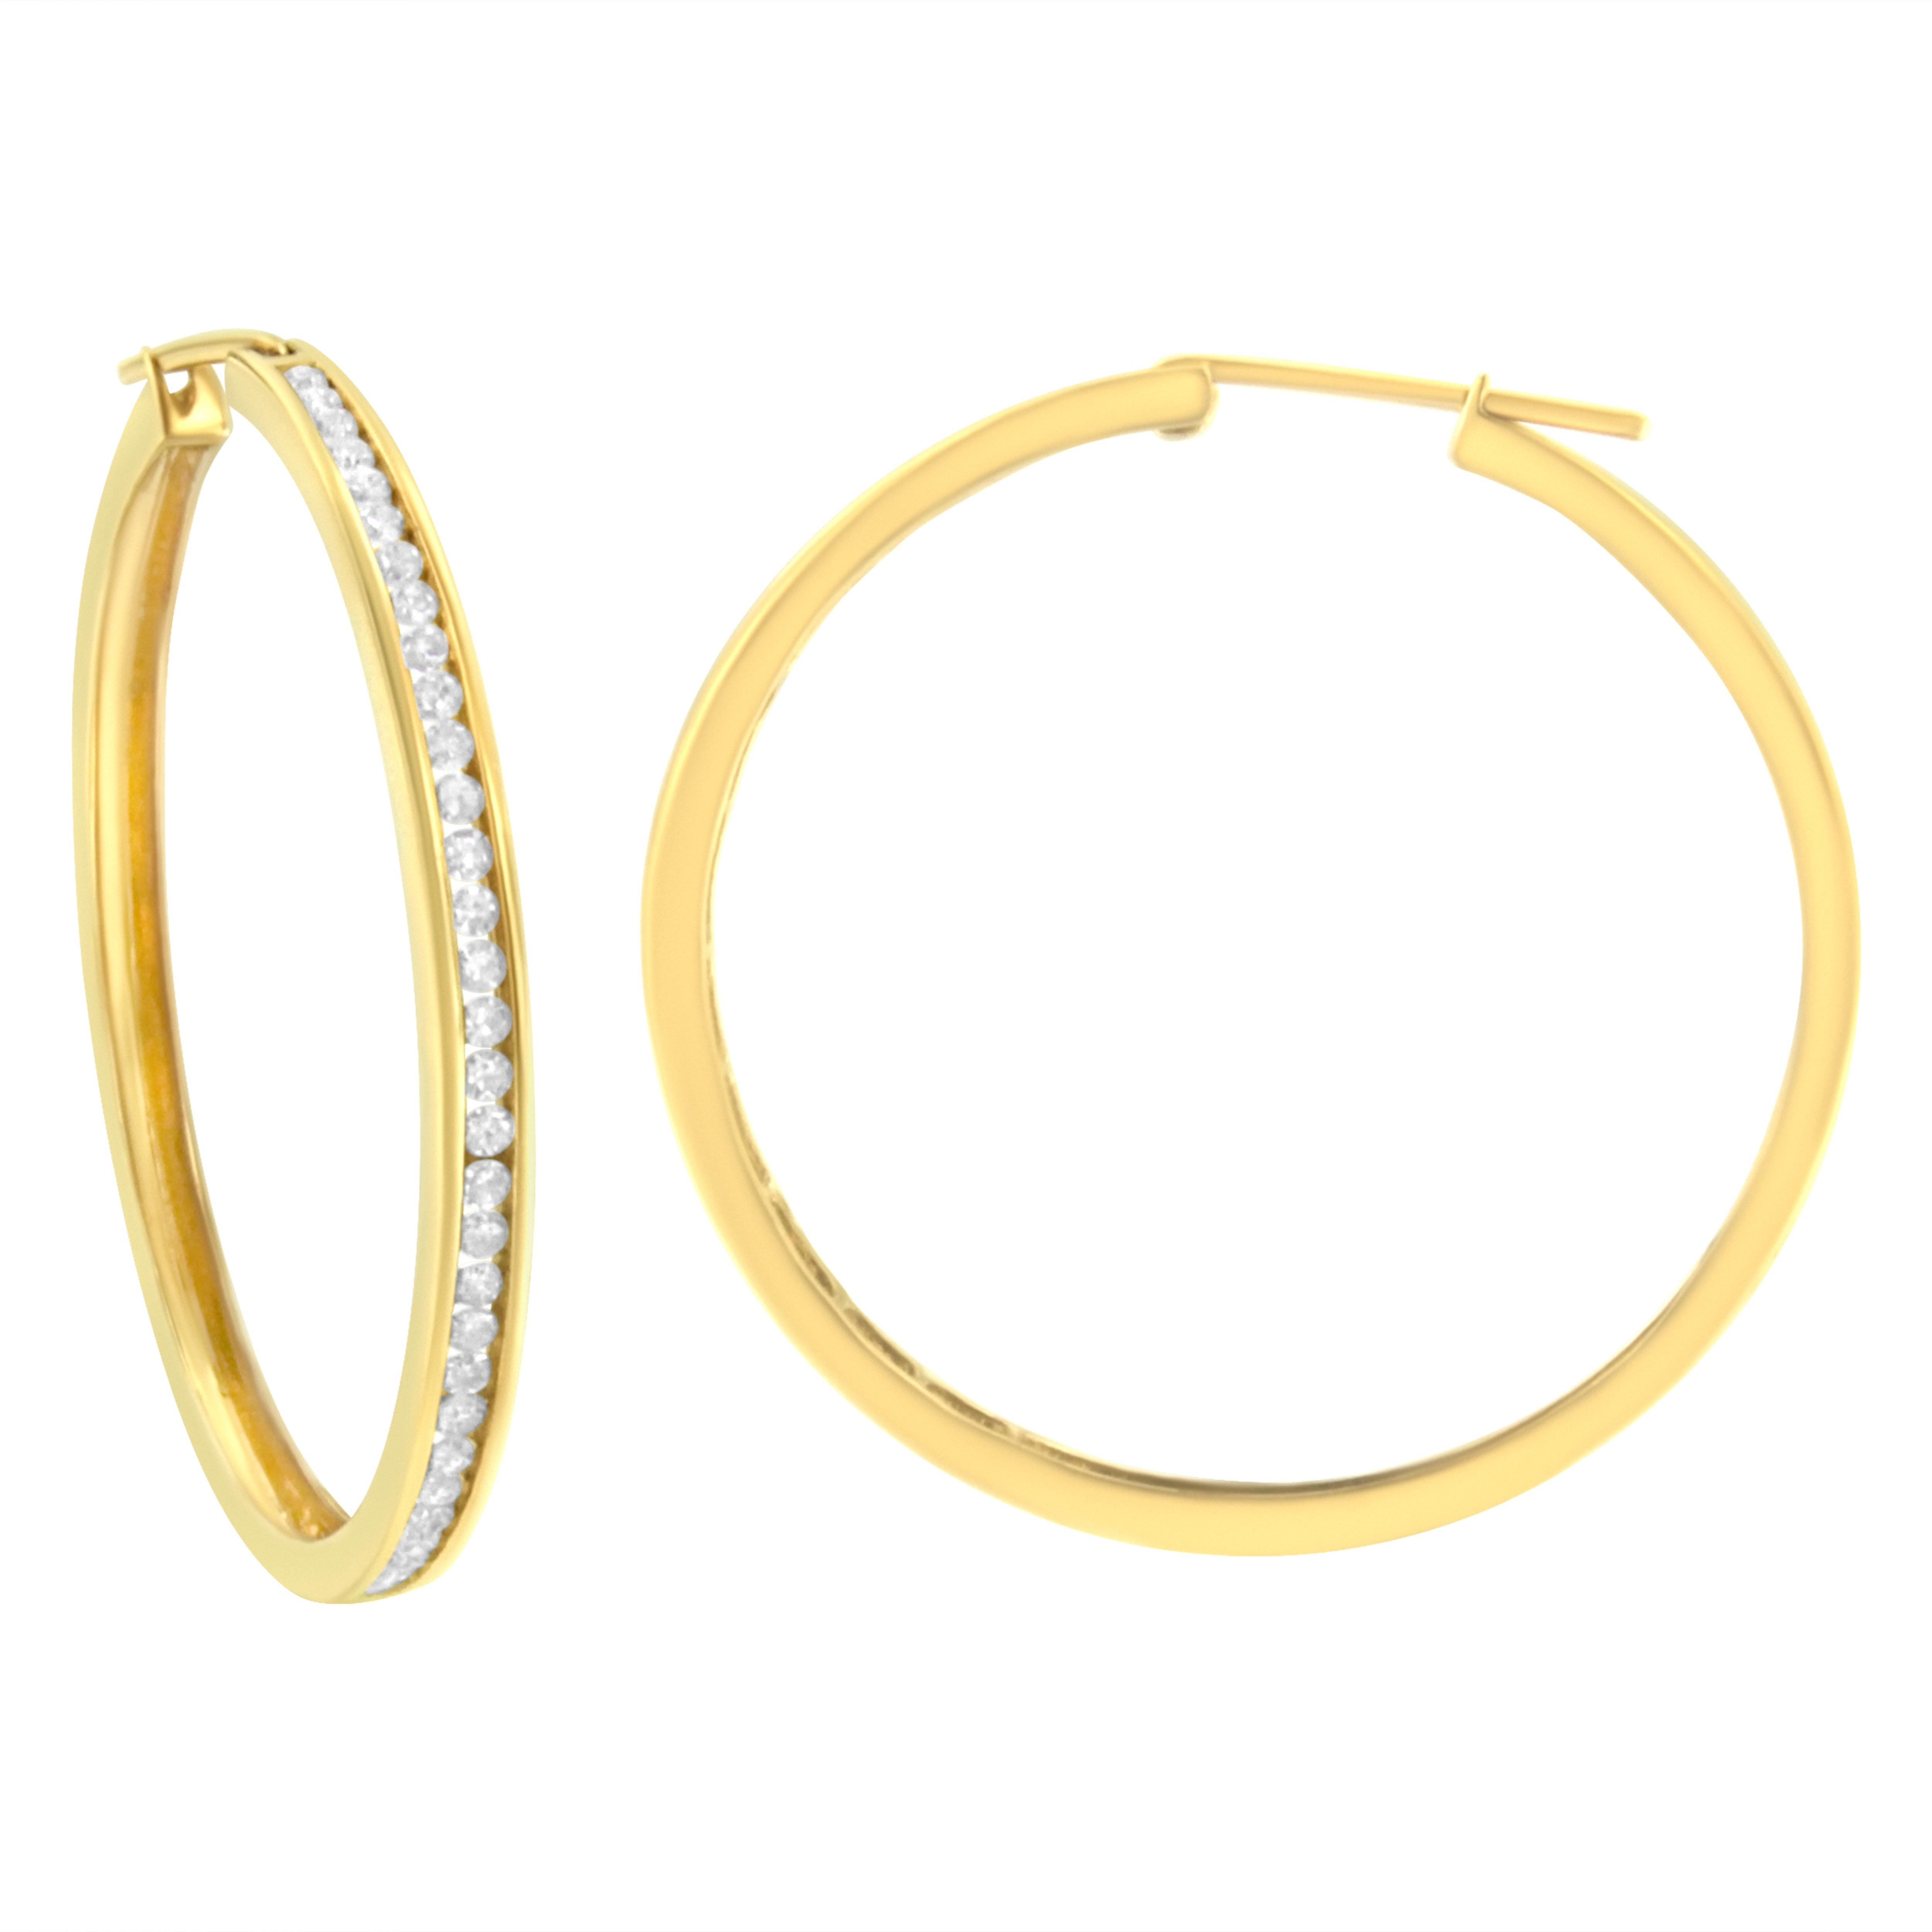 You can't go wrong with these classic 1ct TDW diamond hoop earrings. Sixty six channel set, round cut diamonds sparkle against the warm tone of this 10k yellow gold design. A clip on mechanism keeps the earrings secure. These diamonds are color